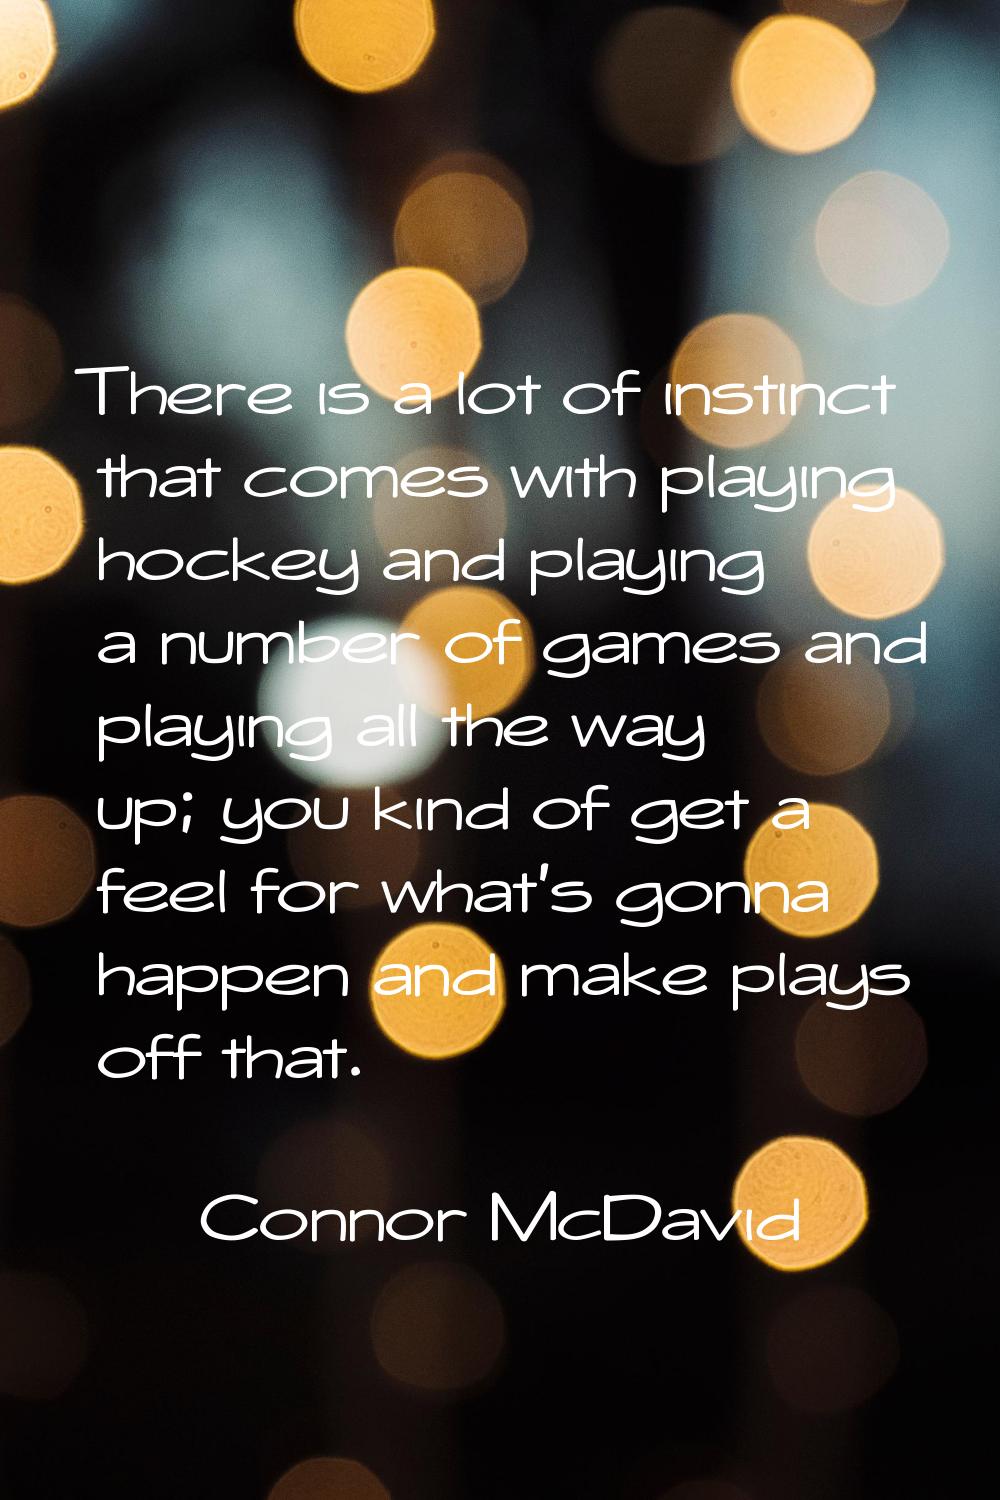 There is a lot of instinct that comes with playing hockey and playing a number of games and playing